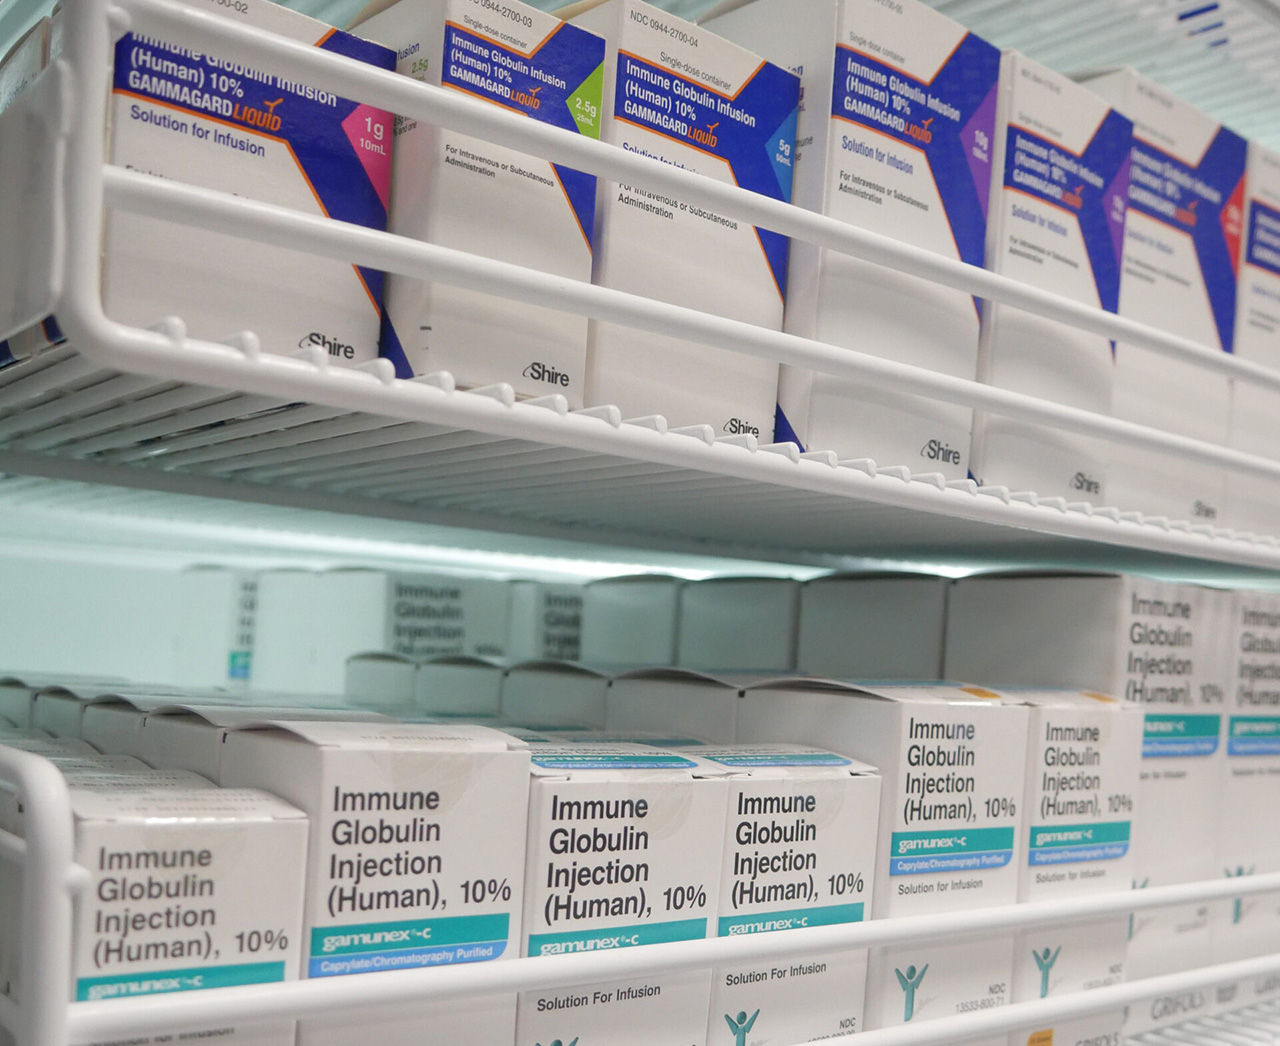 Boxes of immune globulin injections on shelves